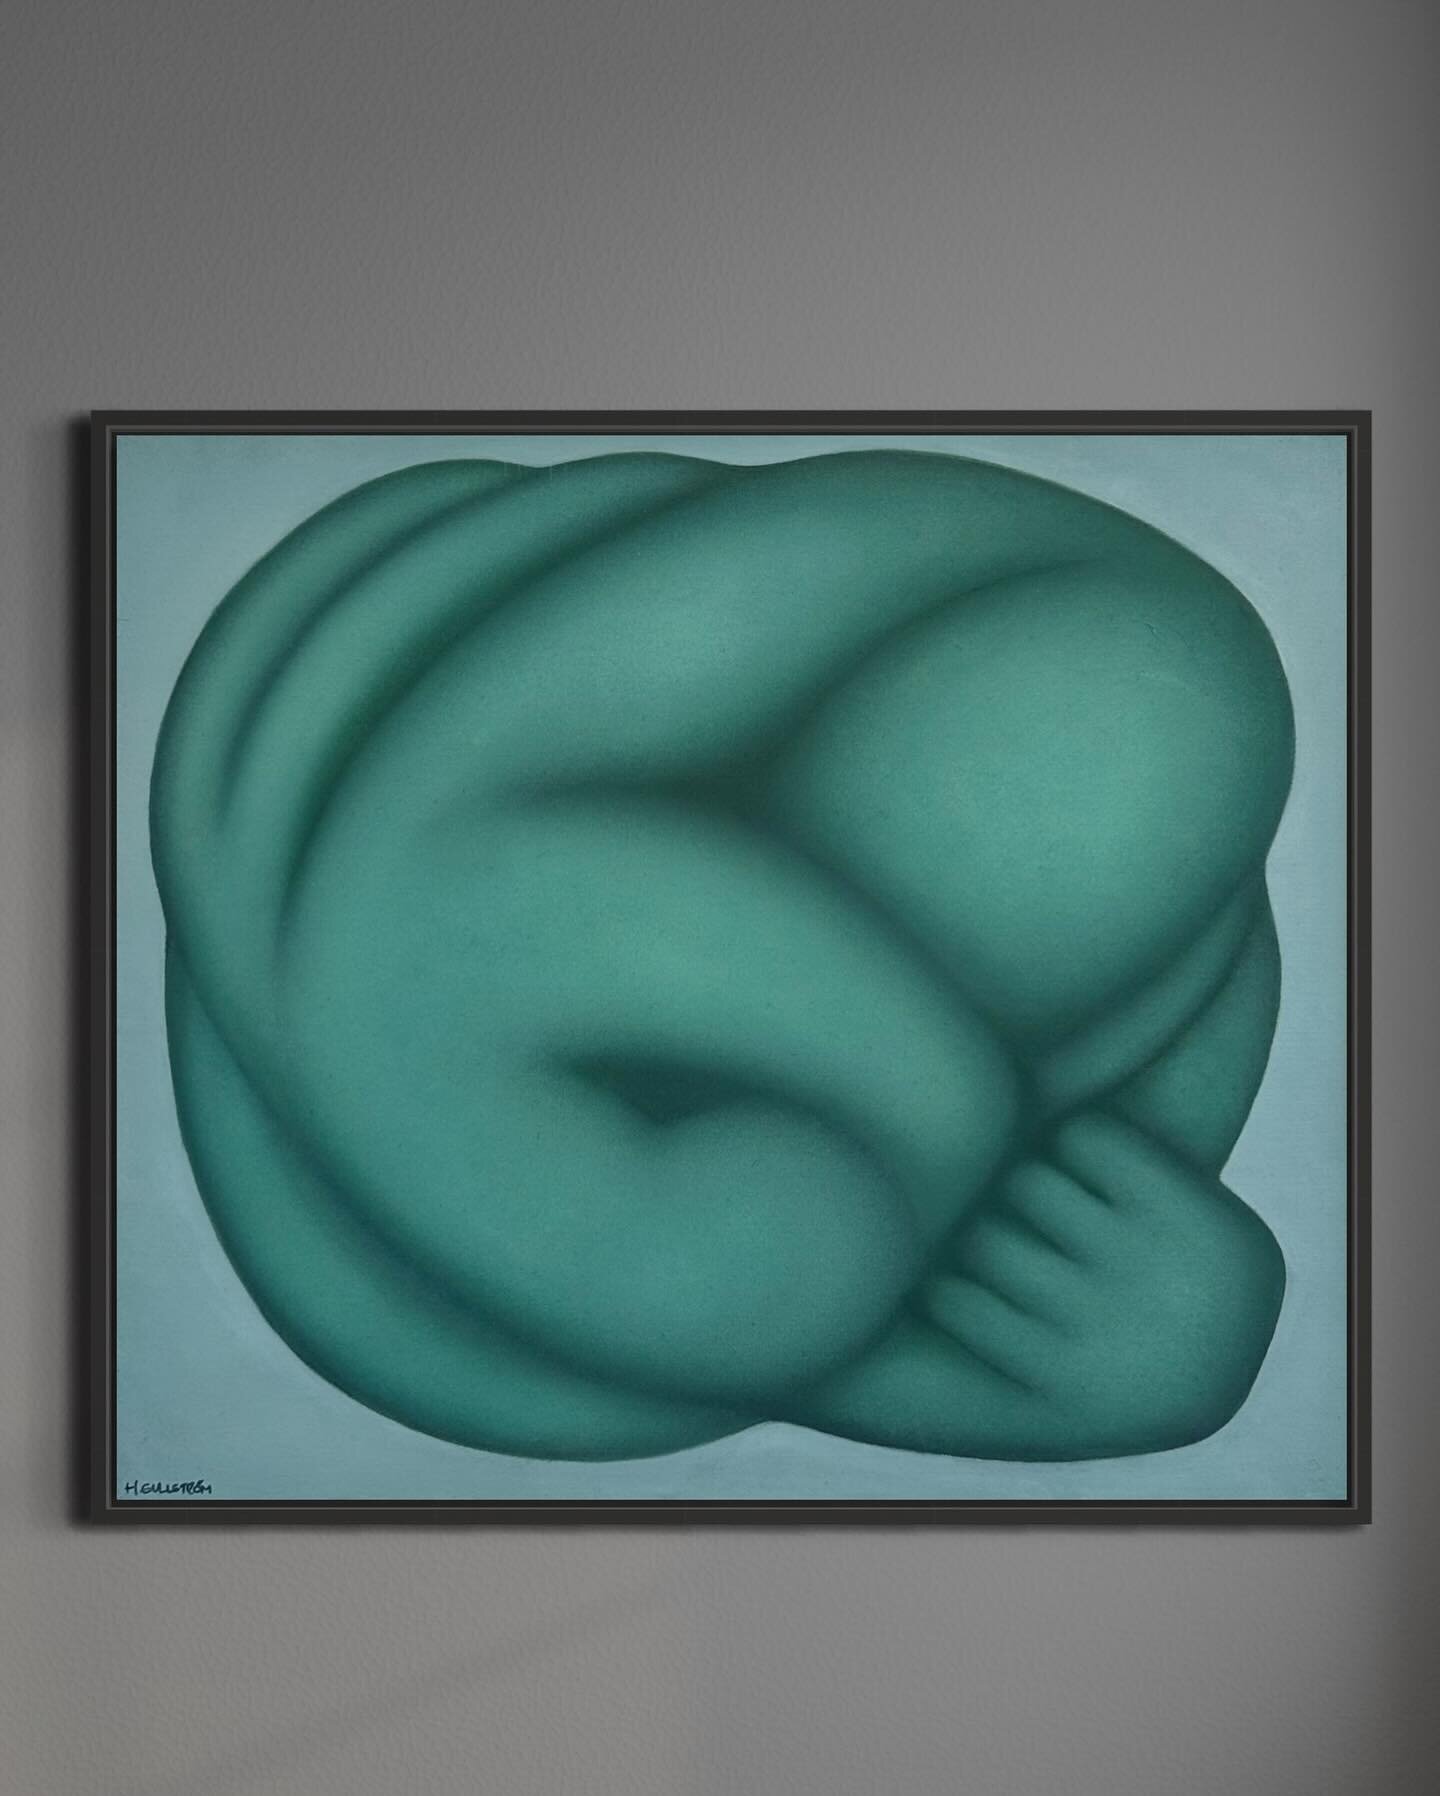 Soft, zen and sculptural? You might feel and see something completely different though.. &ldquo;Embodiment&rdquo; - Oil on canvas 64 x 73 cm ( 25 x 29 inches) Professionally framed in a dark walnut frame. See last pic. Pm/dm for price. Free worldwide